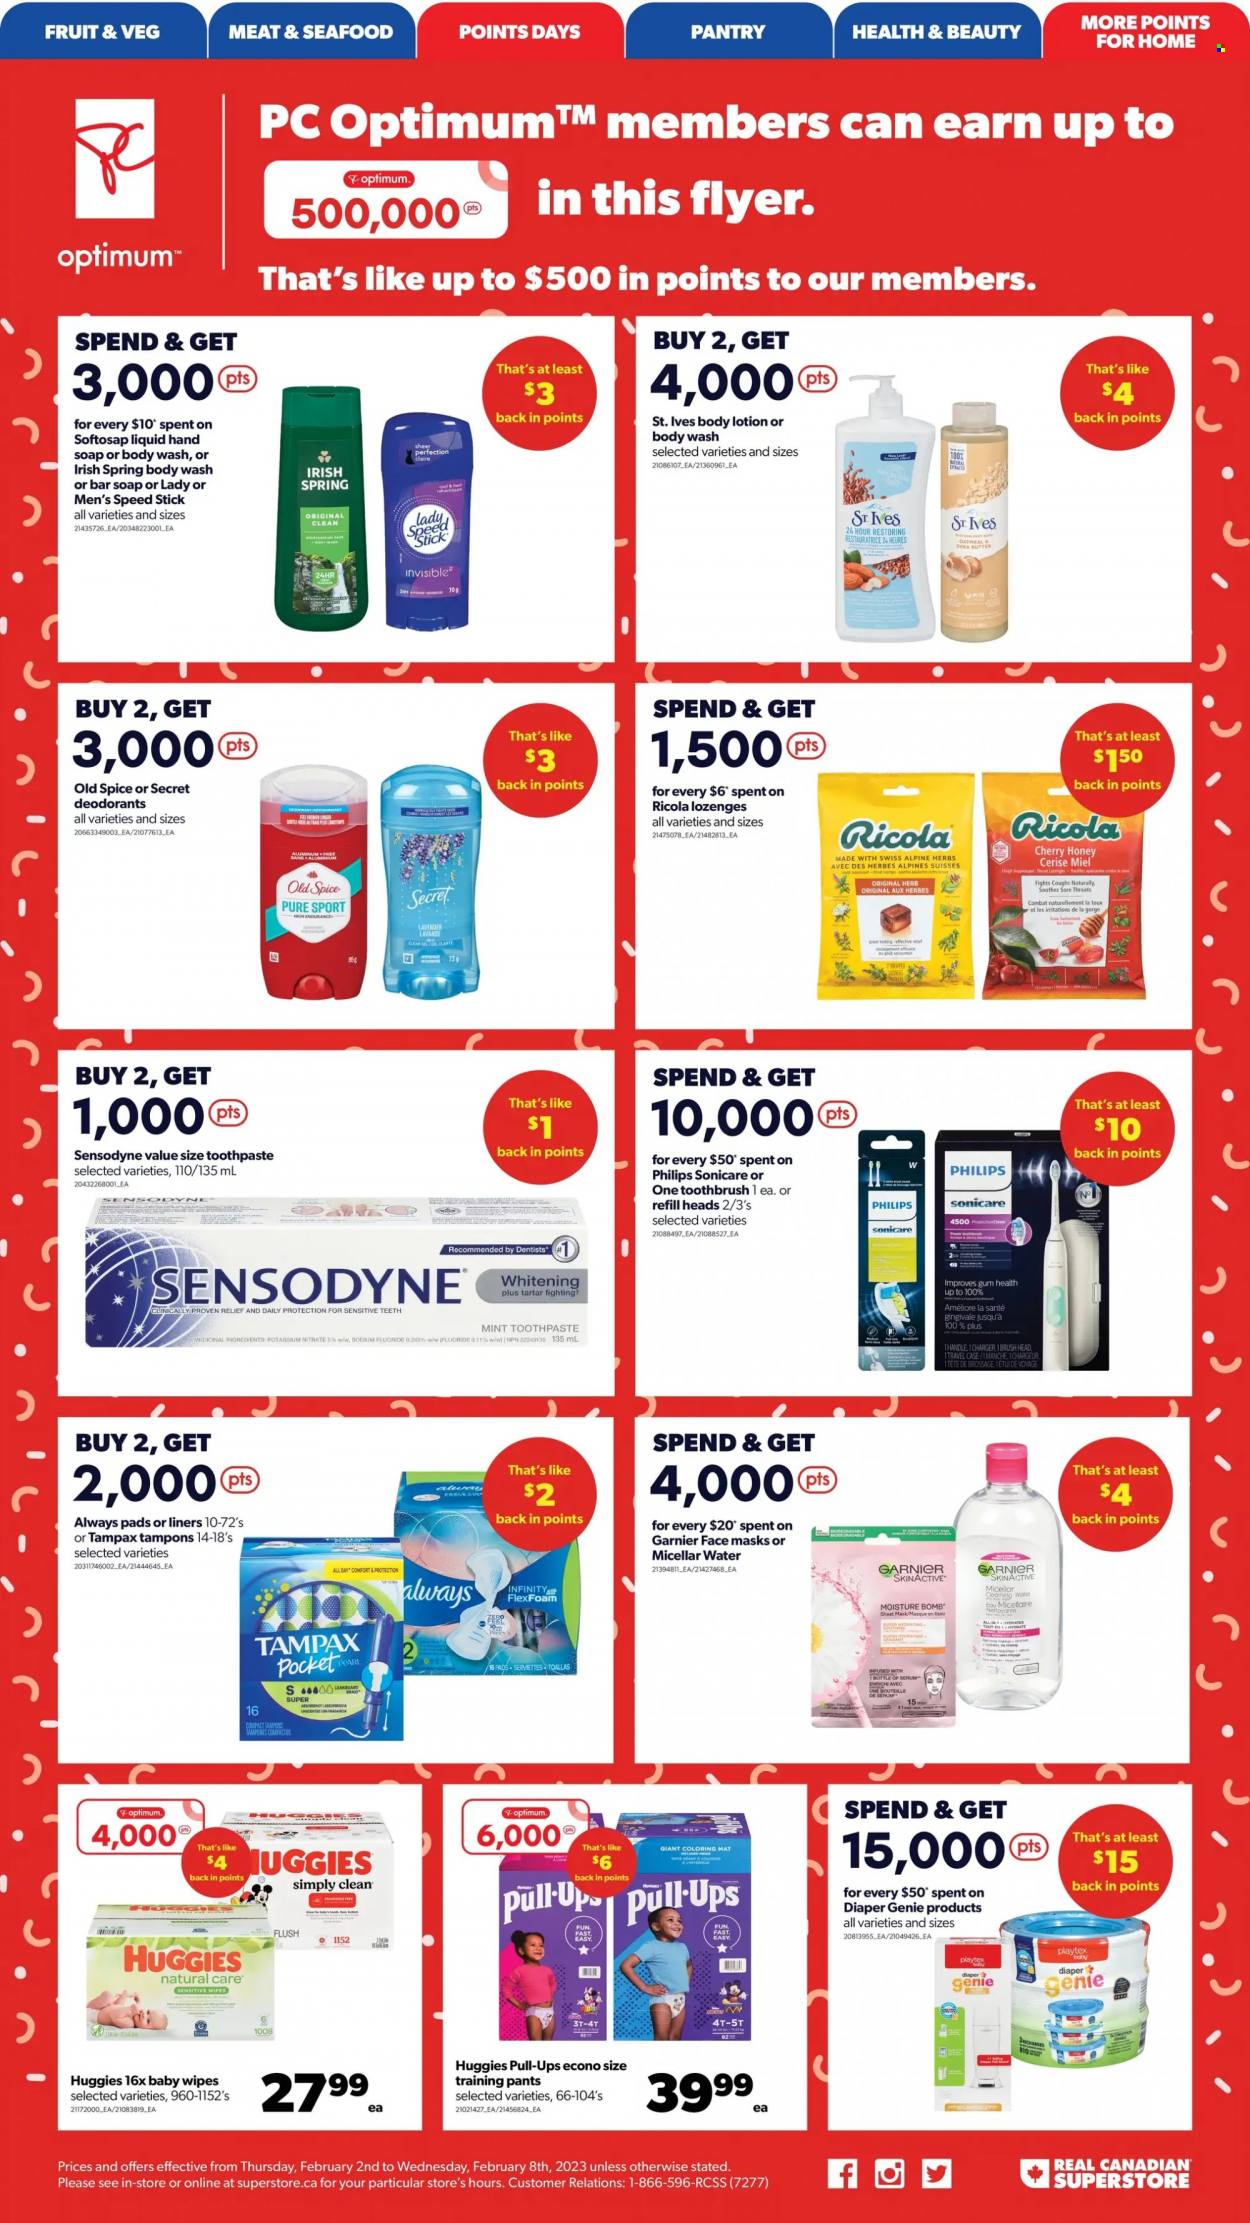 thumbnail - Real Canadian Superstore Flyer - February 02, 2023 - February 08, 2023 - Sales products - Philips, cherries, seafood, Ricola, oatmeal, spice, honey, wipes, pants, baby wipes, baby pants, body wash, hand soap, soap bar, soap, toothbrush, toothpaste, brush head, Playtex, Always pads, sanitary pads, tampons, micellar water, serum, face mask, Infinity, body lotion, shea butter, anti-perspirant, Speed Stick, Optimum, Sonicare, Garnier, Tampax, Huggies, Old Spice, Sensodyne, deodorant. Page 5.